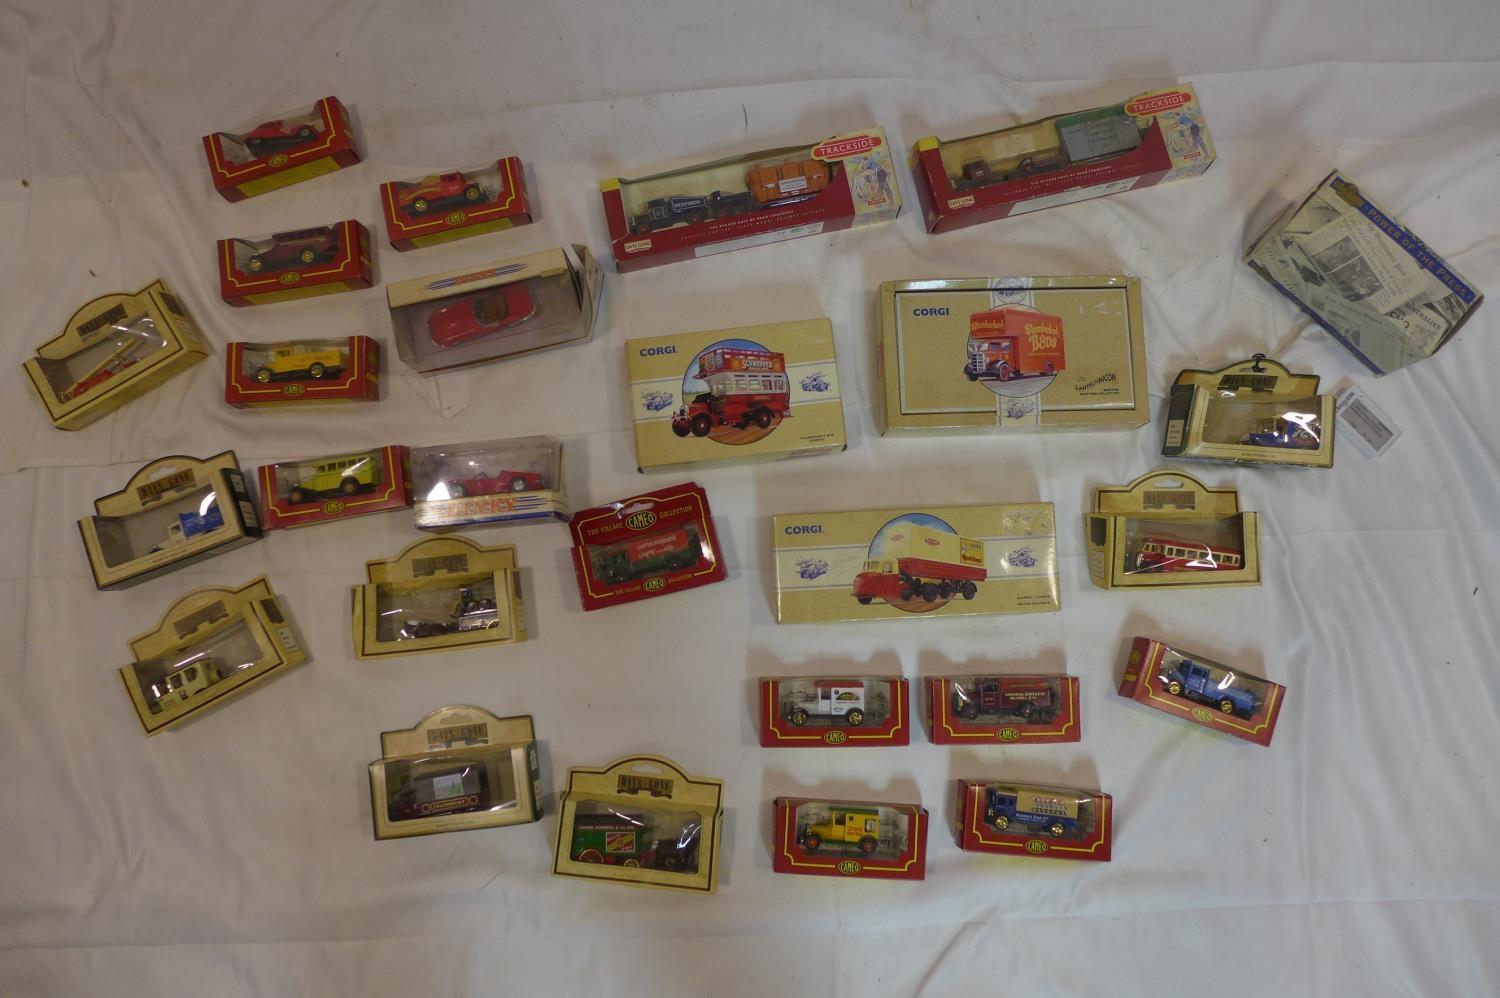 A collection of 20 vintage die cast toy cars, to include Dinky, Corgi and Days Gone examples, in